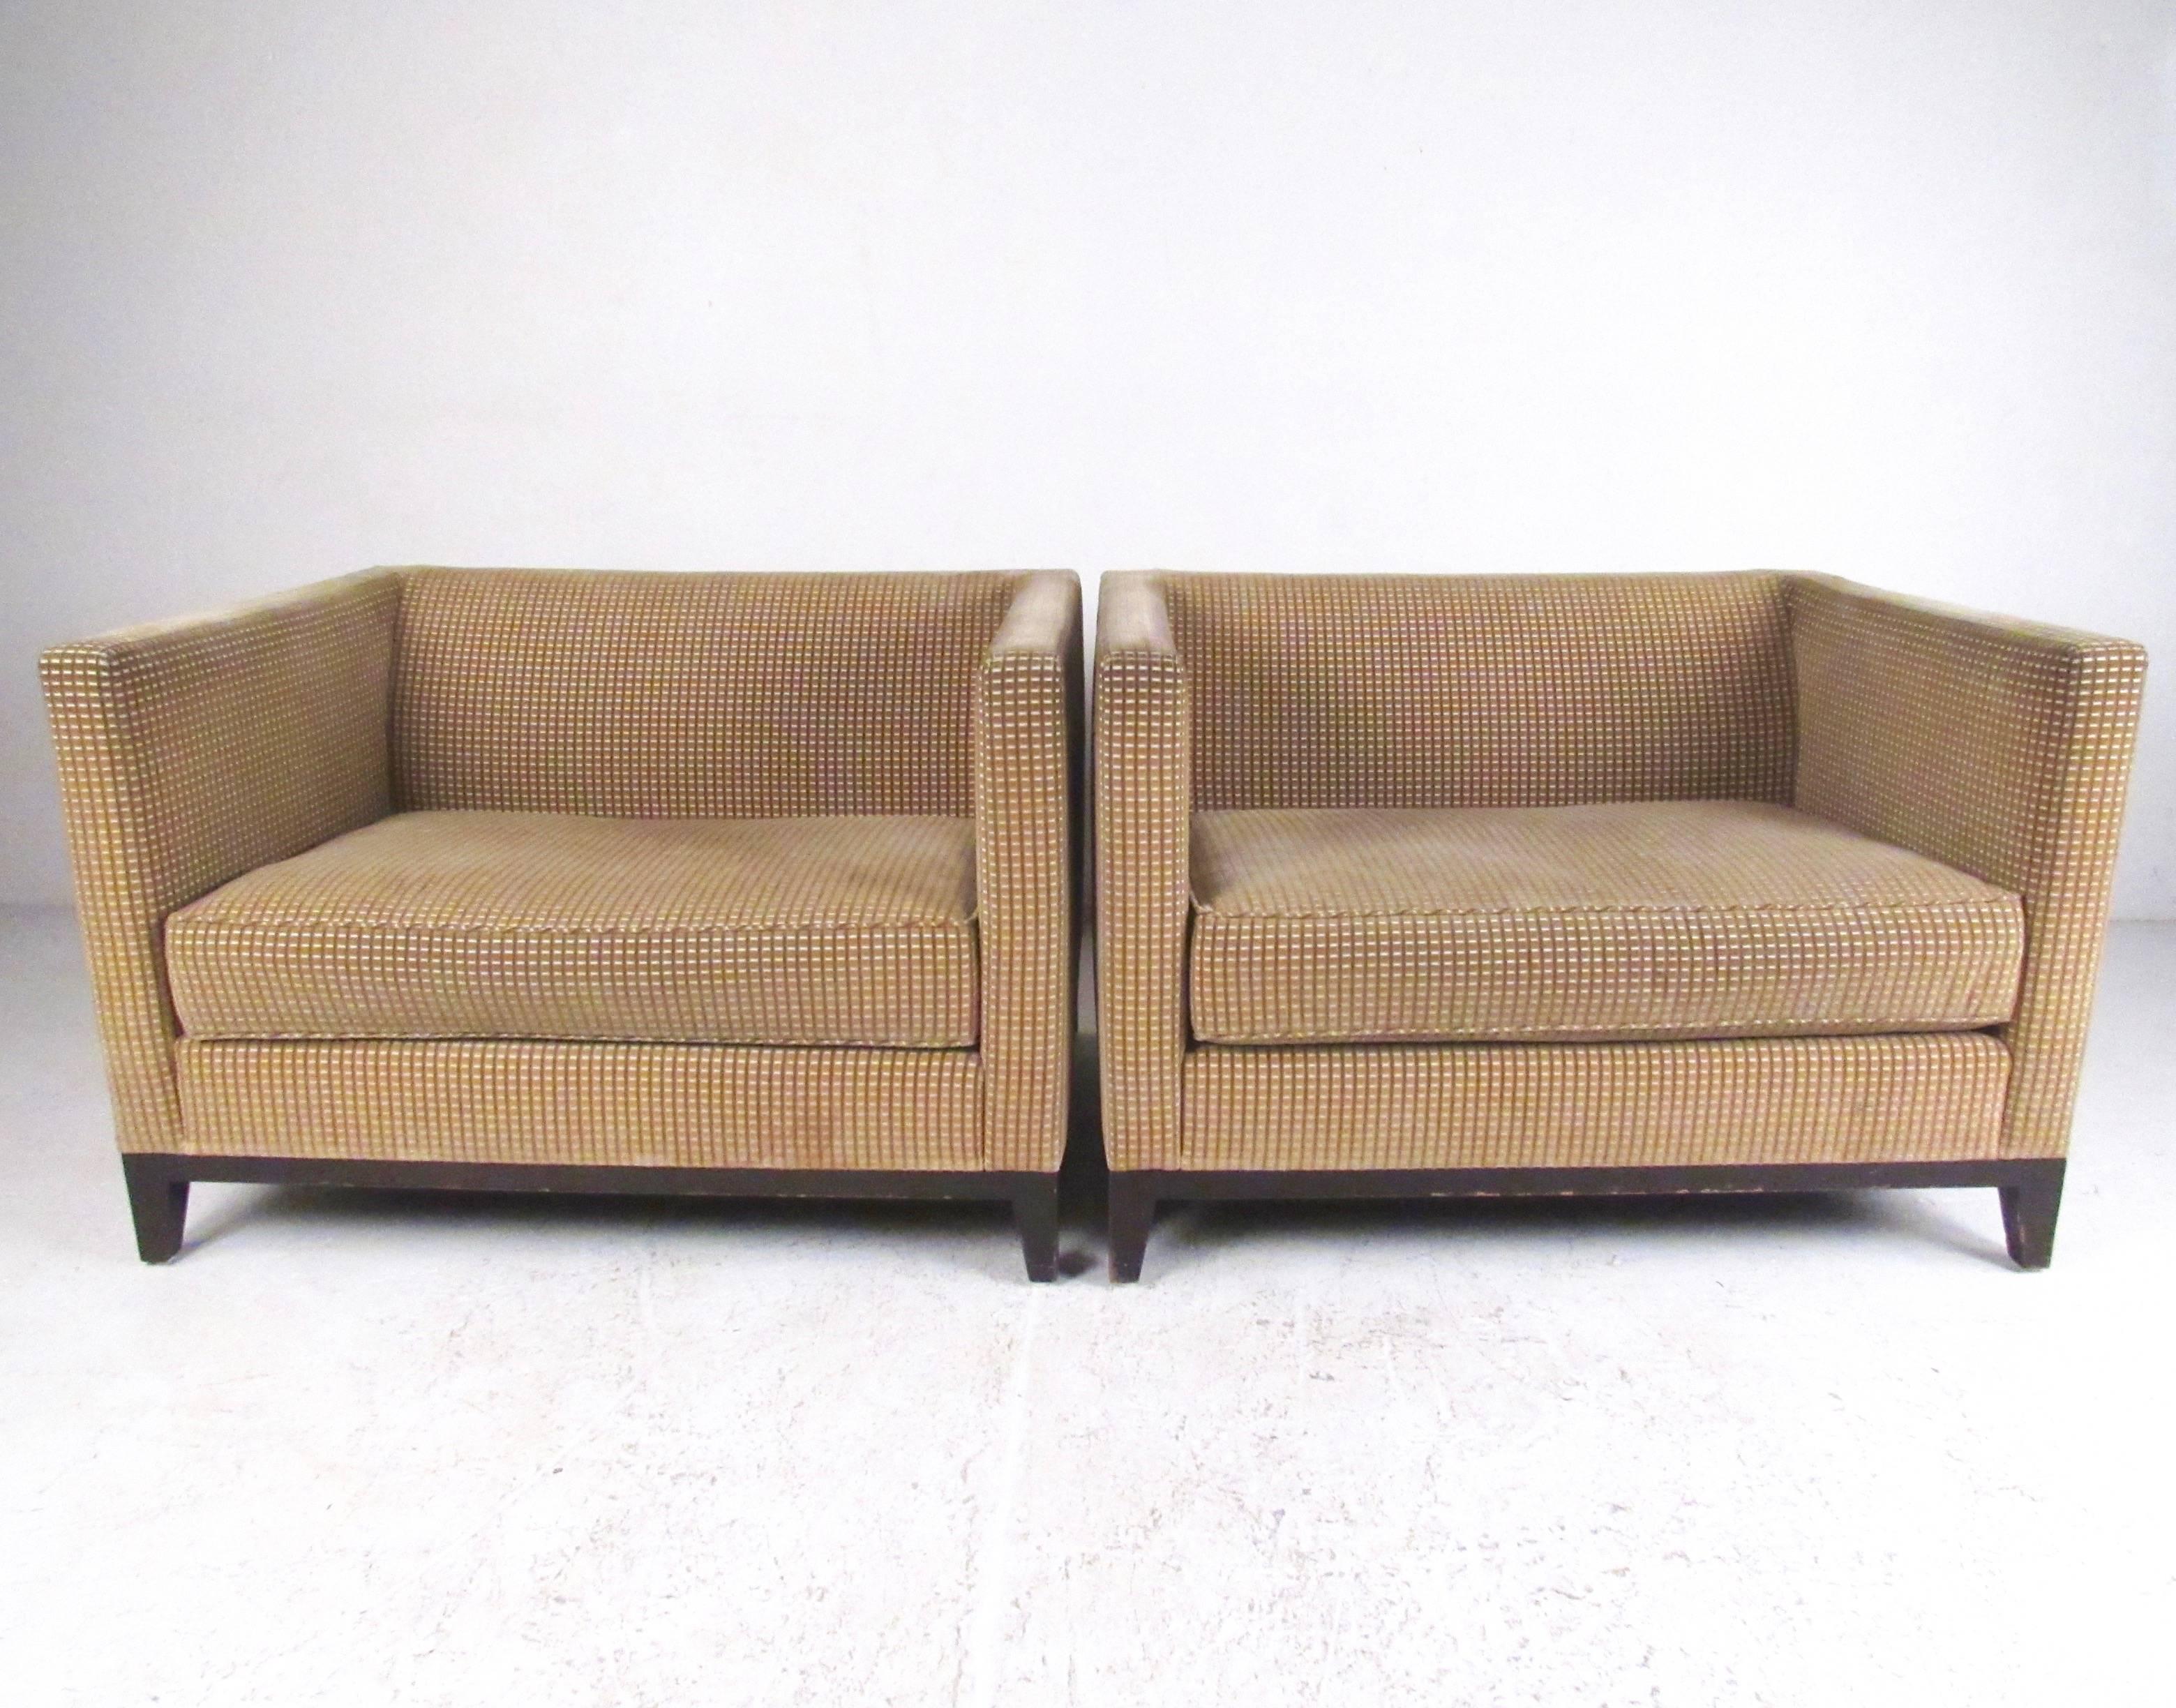 This stylish pair of oversized club chairs by Christian Liaigre for Holly Hunt makes a striking addition to home or business seating area. The clean modern design of this matched pair provides a unique seating set in any interior. Please confirm